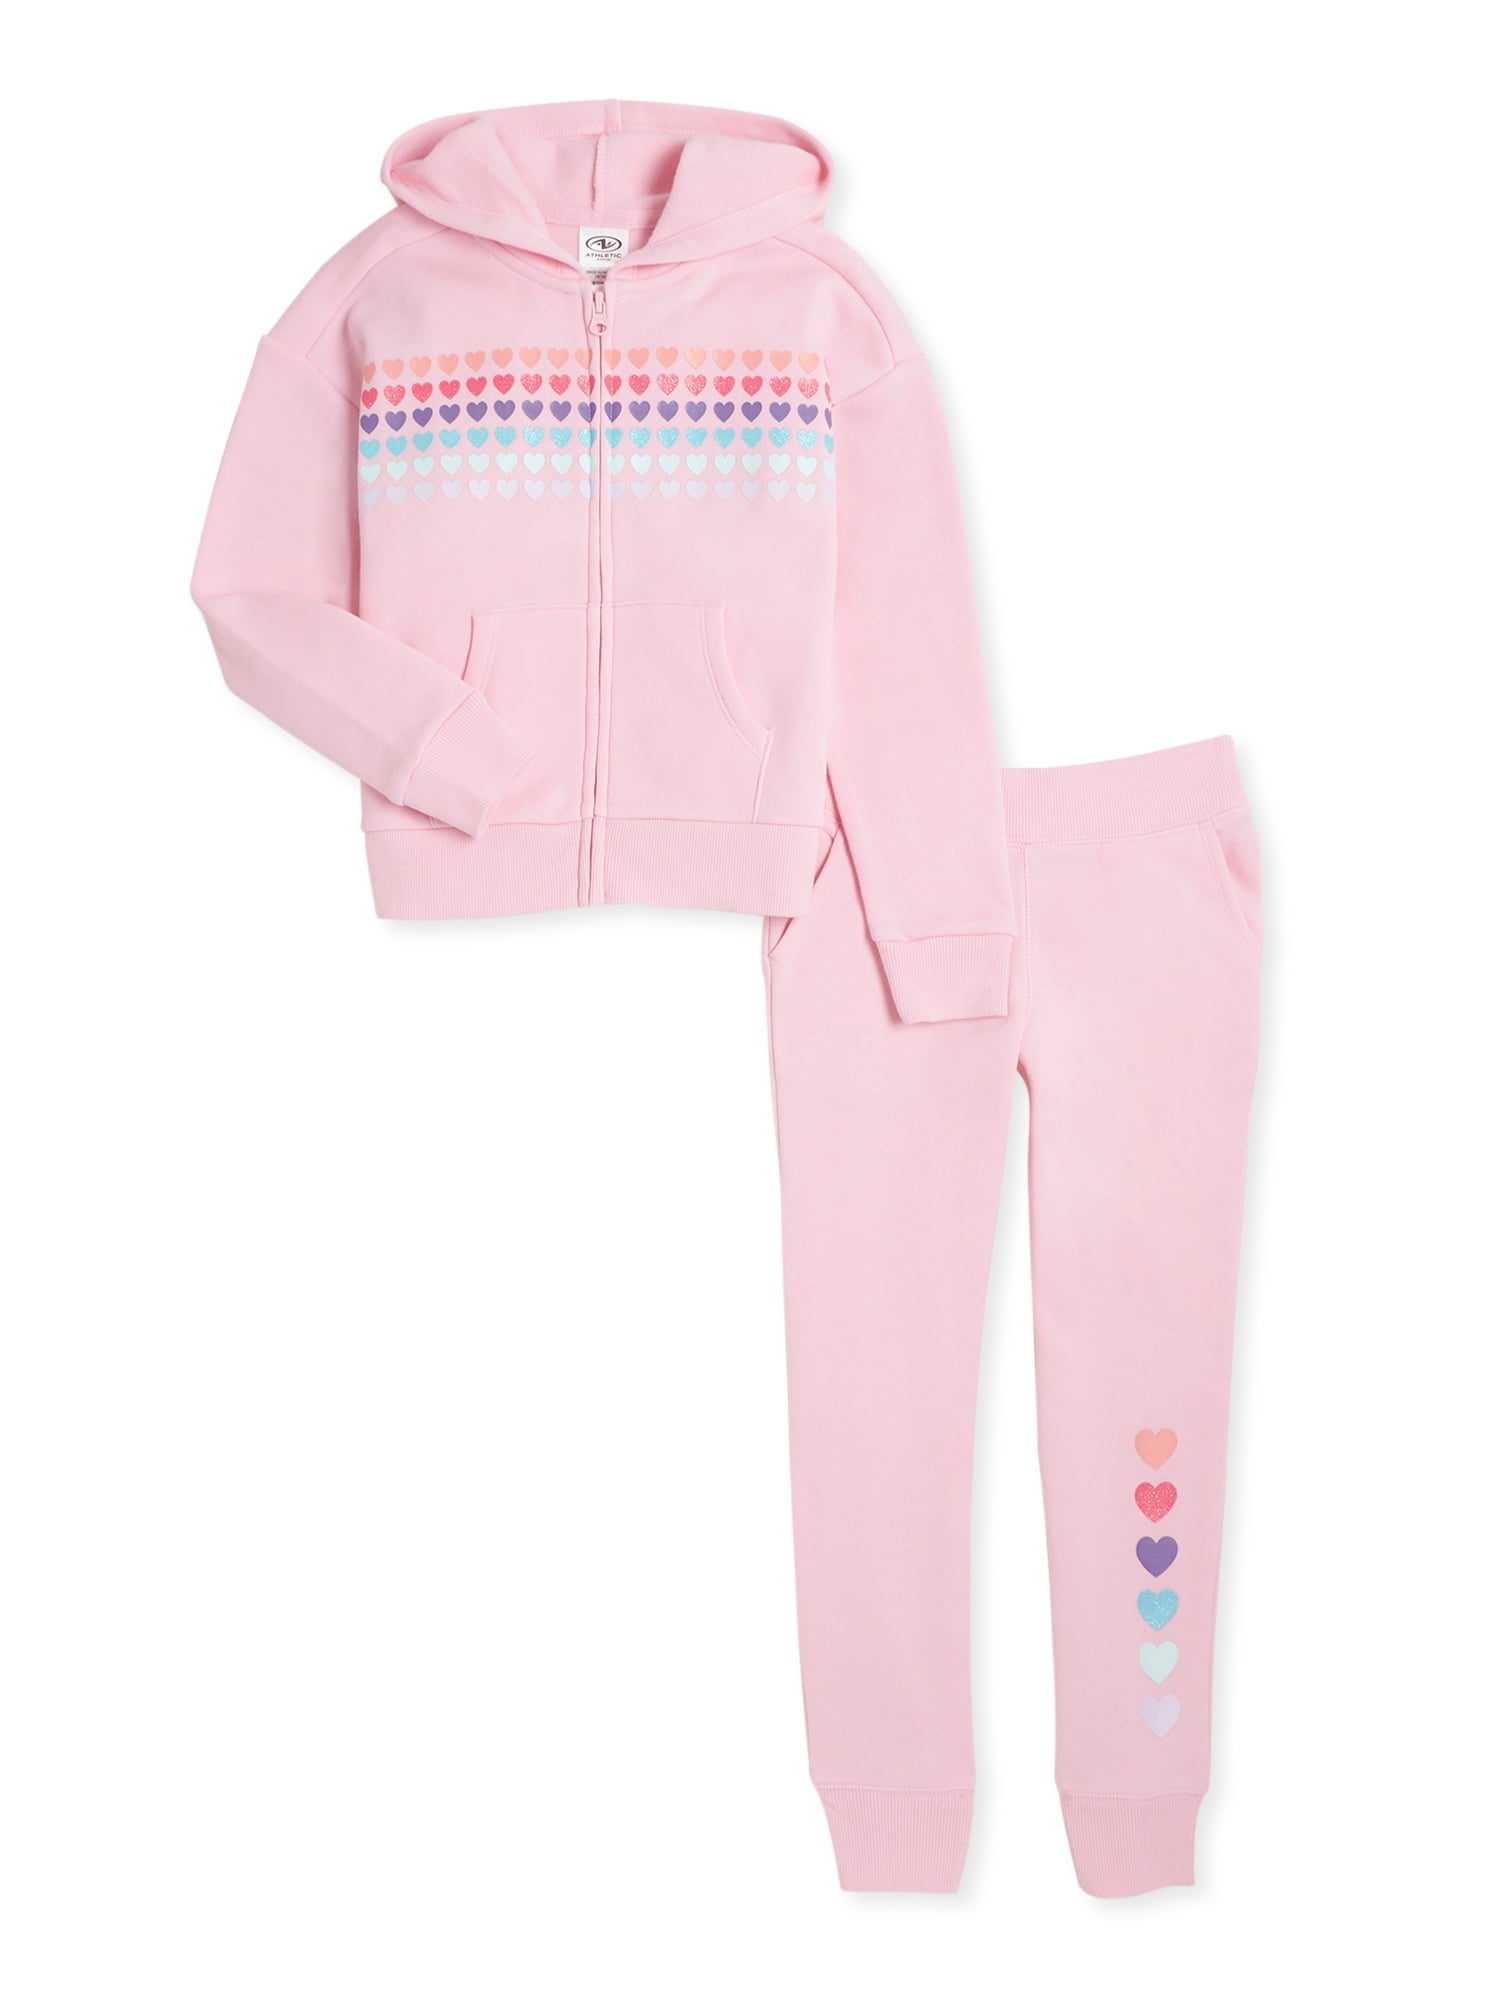 Baby Girls Pretty Stars Hooded Cuddle Fleece Top and Jog Pant Set 